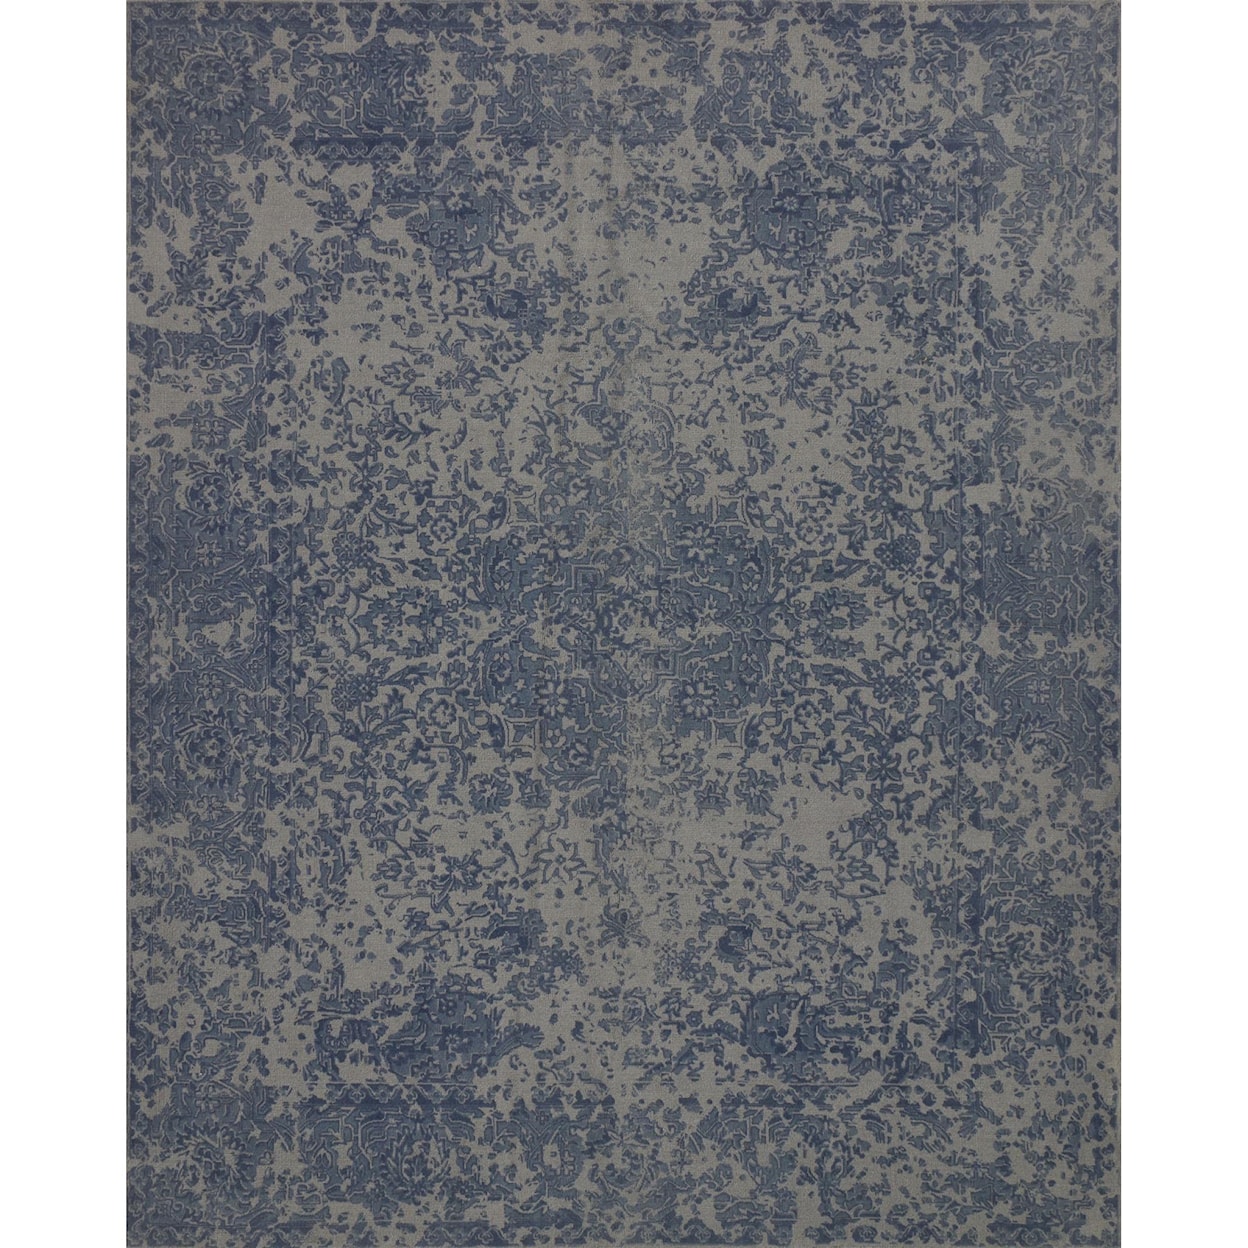 Magnolia Home by Joanna Gaines for Loloi Lily Park 9' 3" X 13' Rectangle Rug